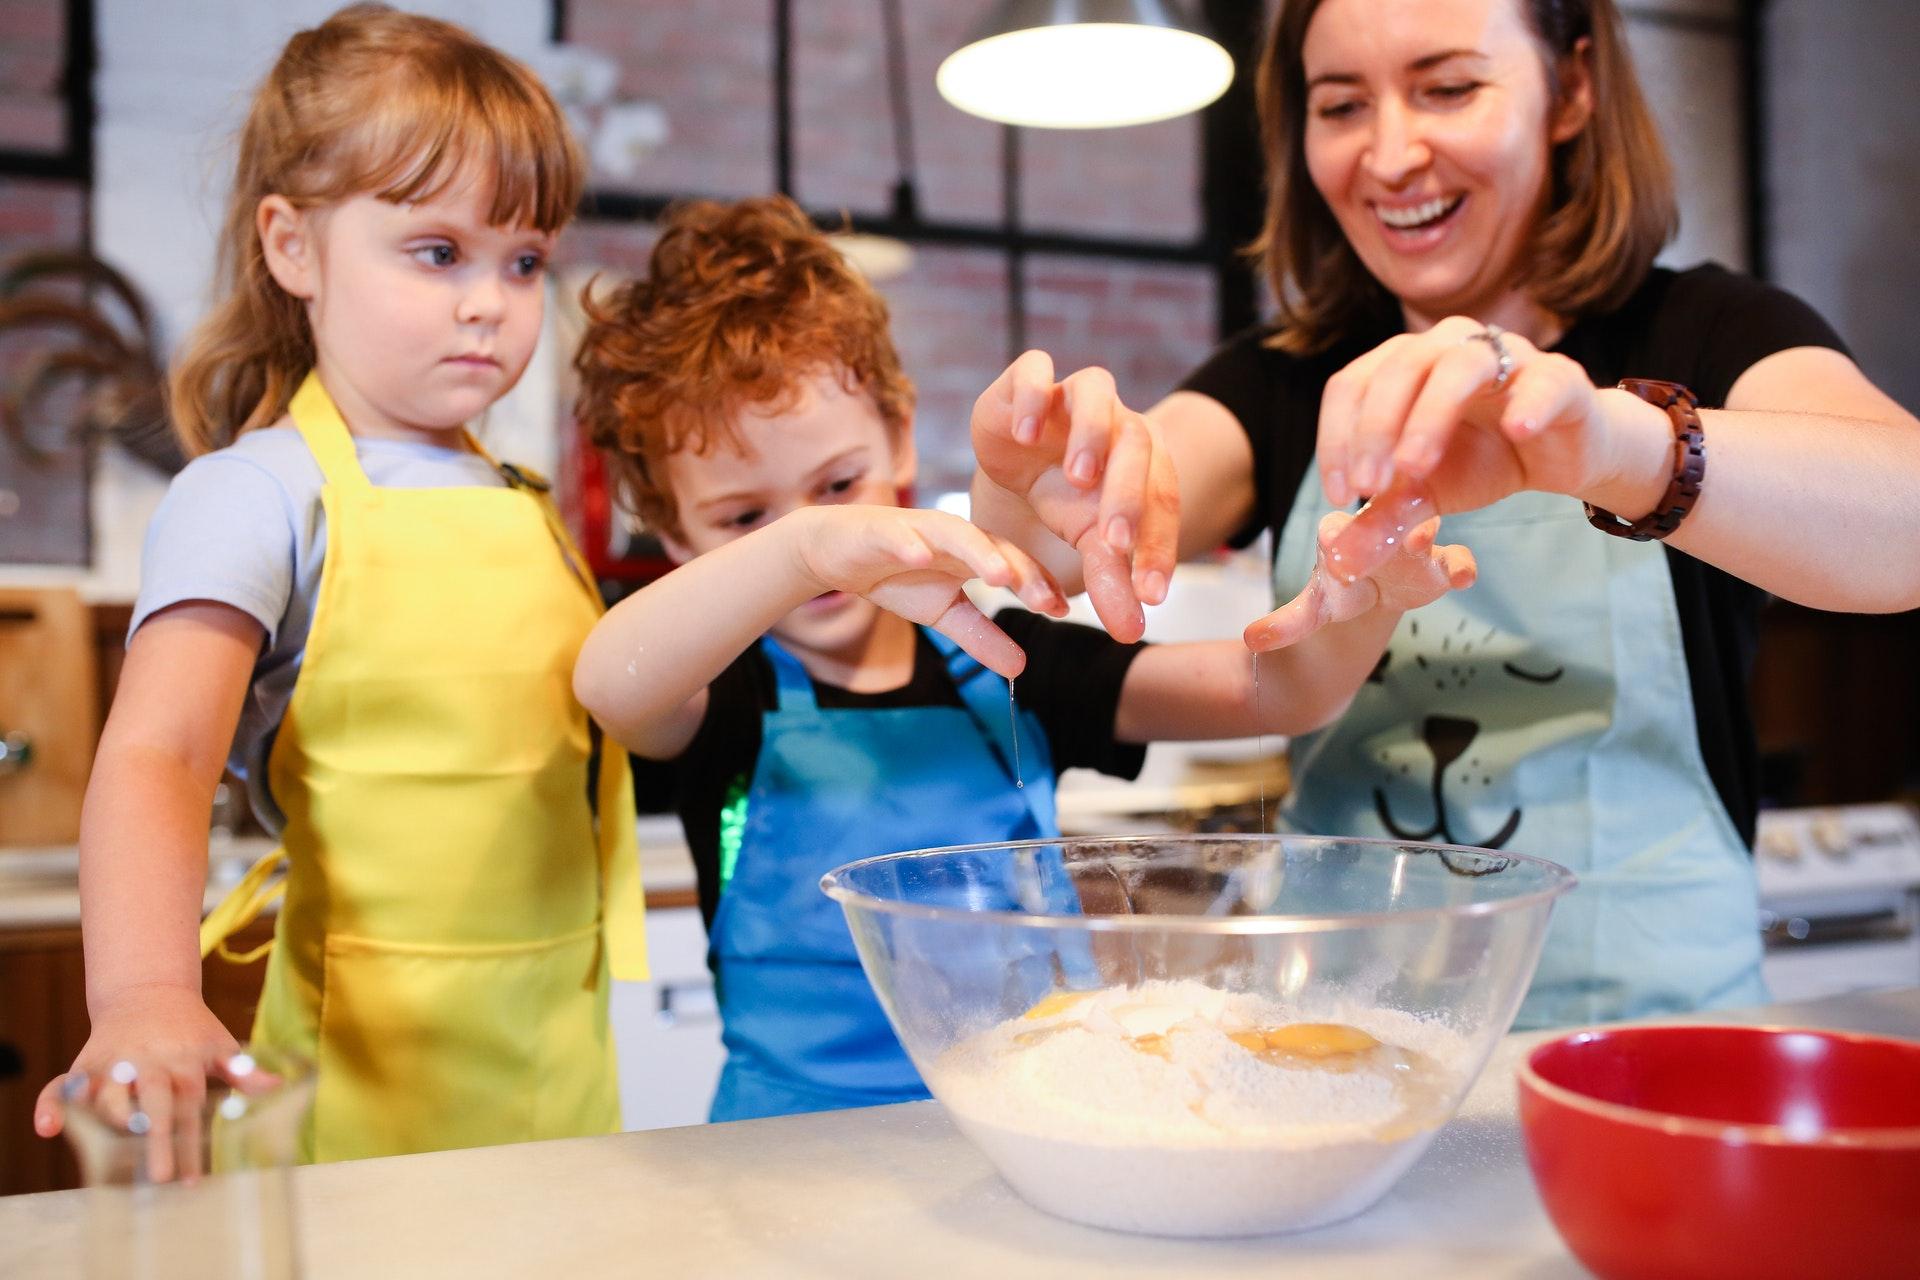 These are a few activities for children in the kitchen!